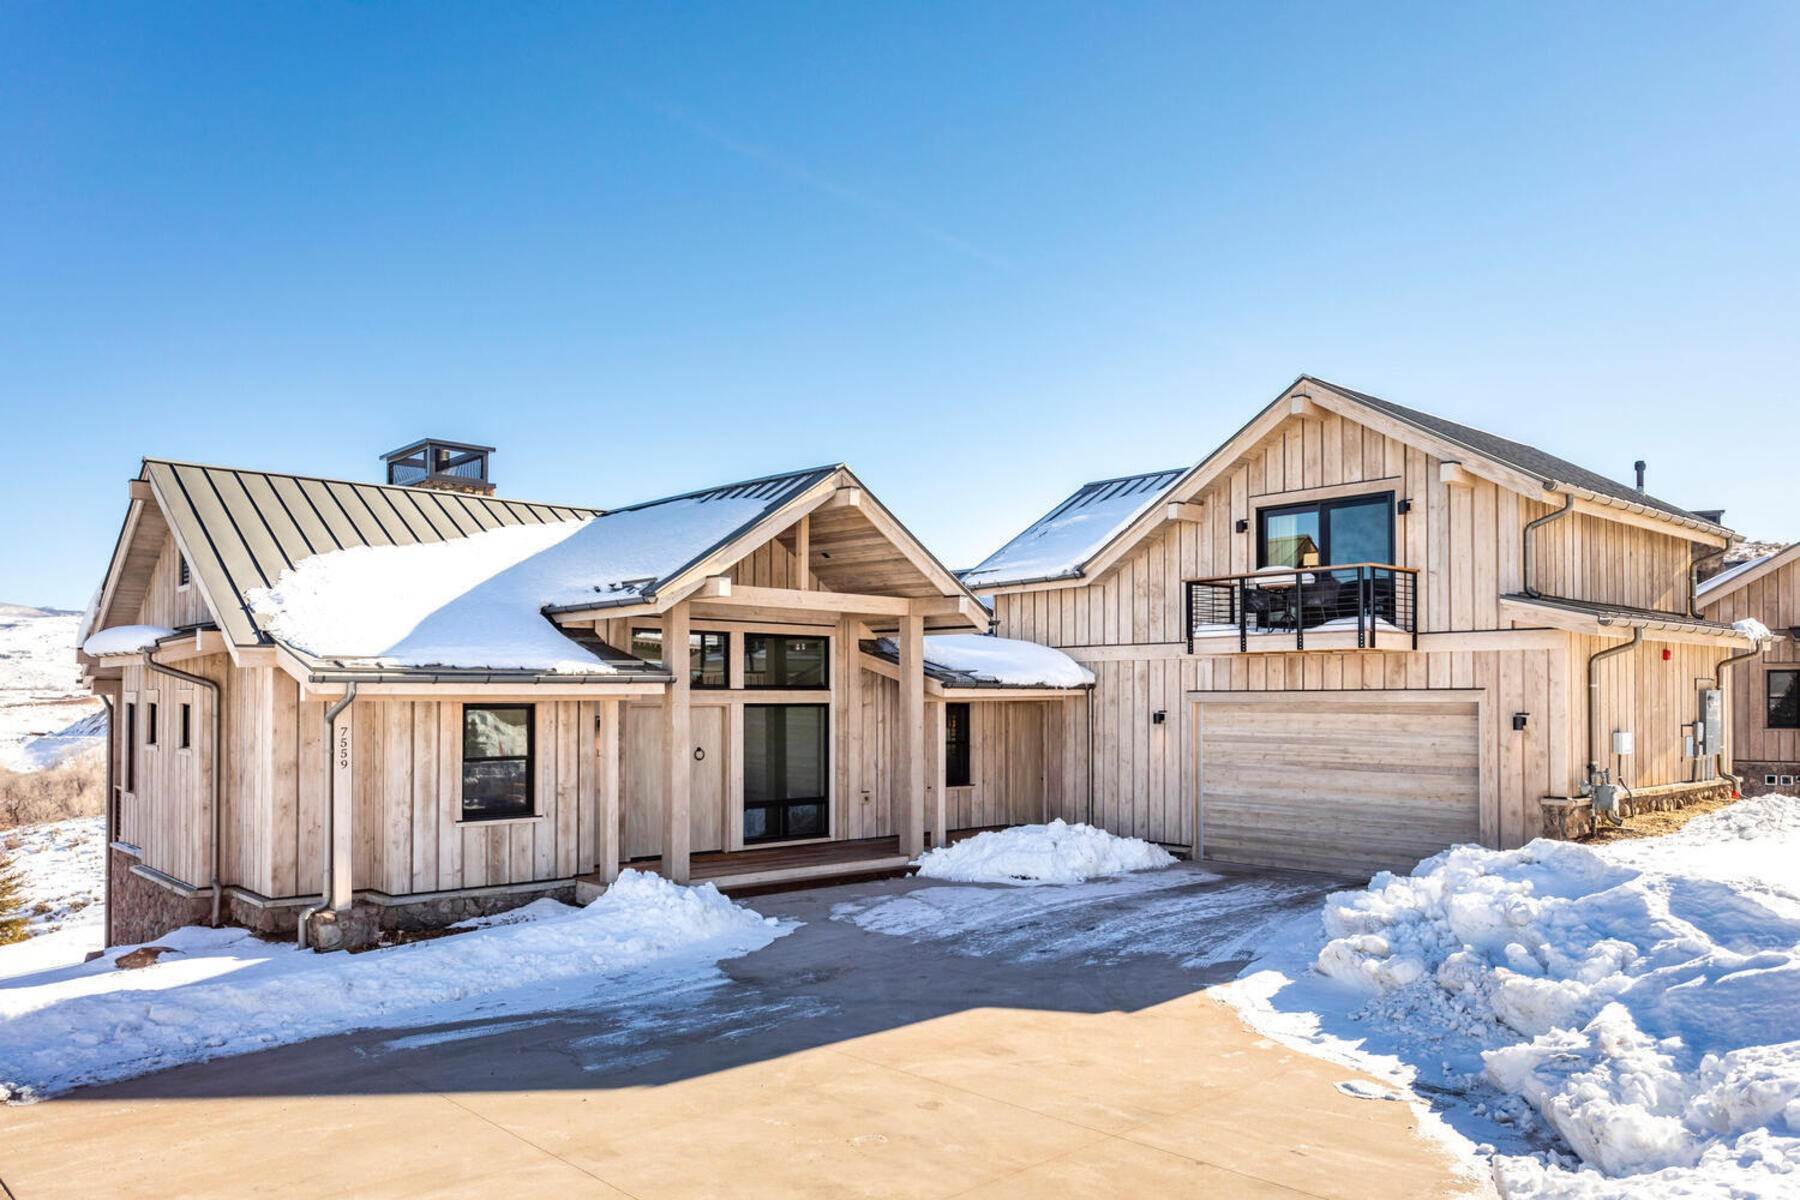 47. Fractional Ownership Property for Sale at Fractional 1/8th Ownership in the Kingfisher Cabin at the Residence Club at VR 7481 E. Moon Light Drive, 310C, 5.43 Heber City, Utah 84032 United States